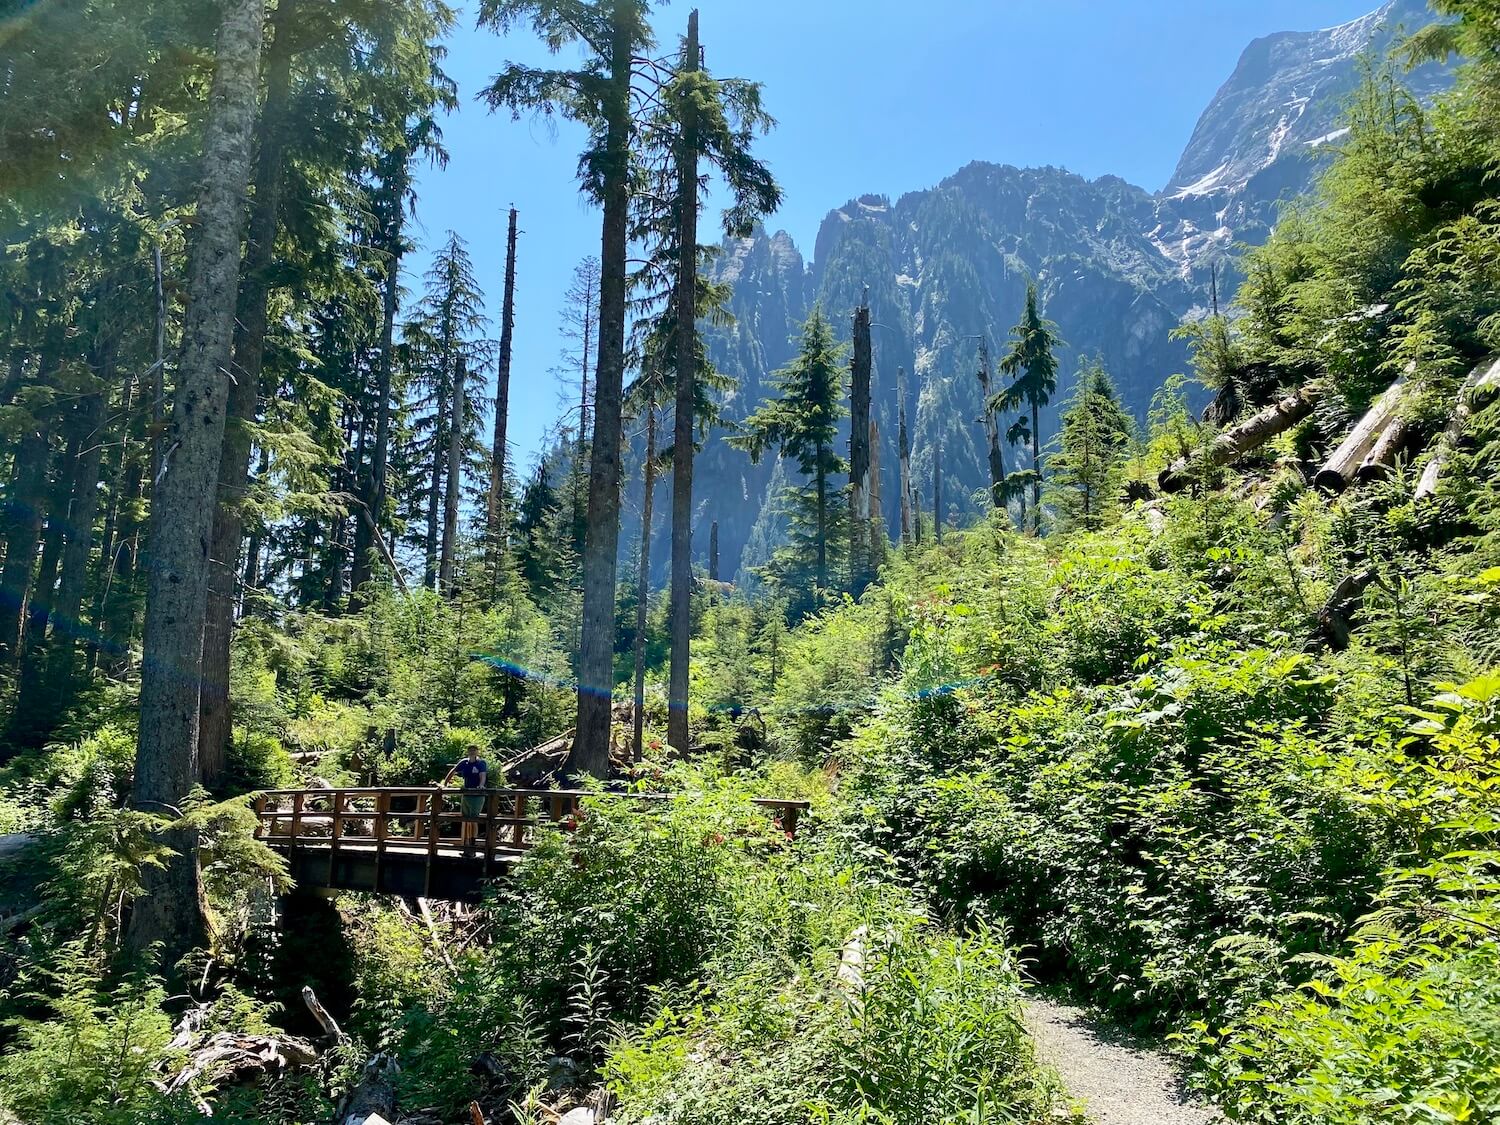 This stunning wilderness scene is viewed on the hiking trail to Big Four Ice Caves. The gravel trail leads to a foot bridge made of wood and Matthew Kessi stands on the bridge for the photo. Around him are fallen trees from former avalanches and the towering mountains beyond the forest.